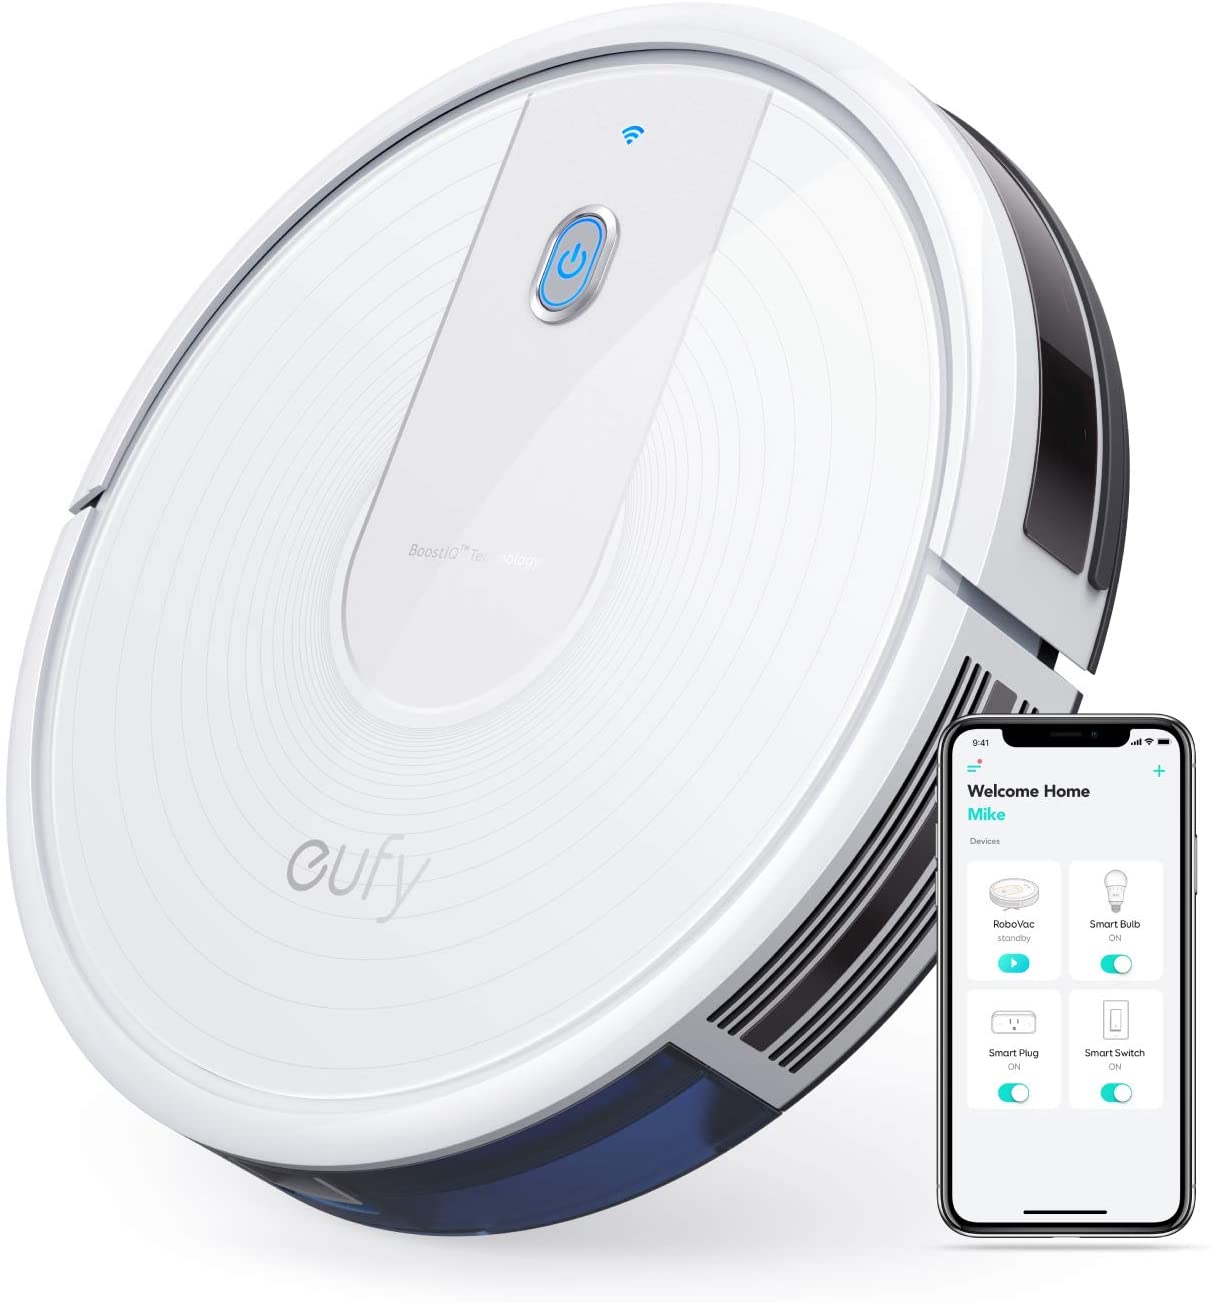 eufy by Anker, BoostIQ RoboVac 15C Robotic Vacuum Cleaner (White) $139.99 + Free Shipping